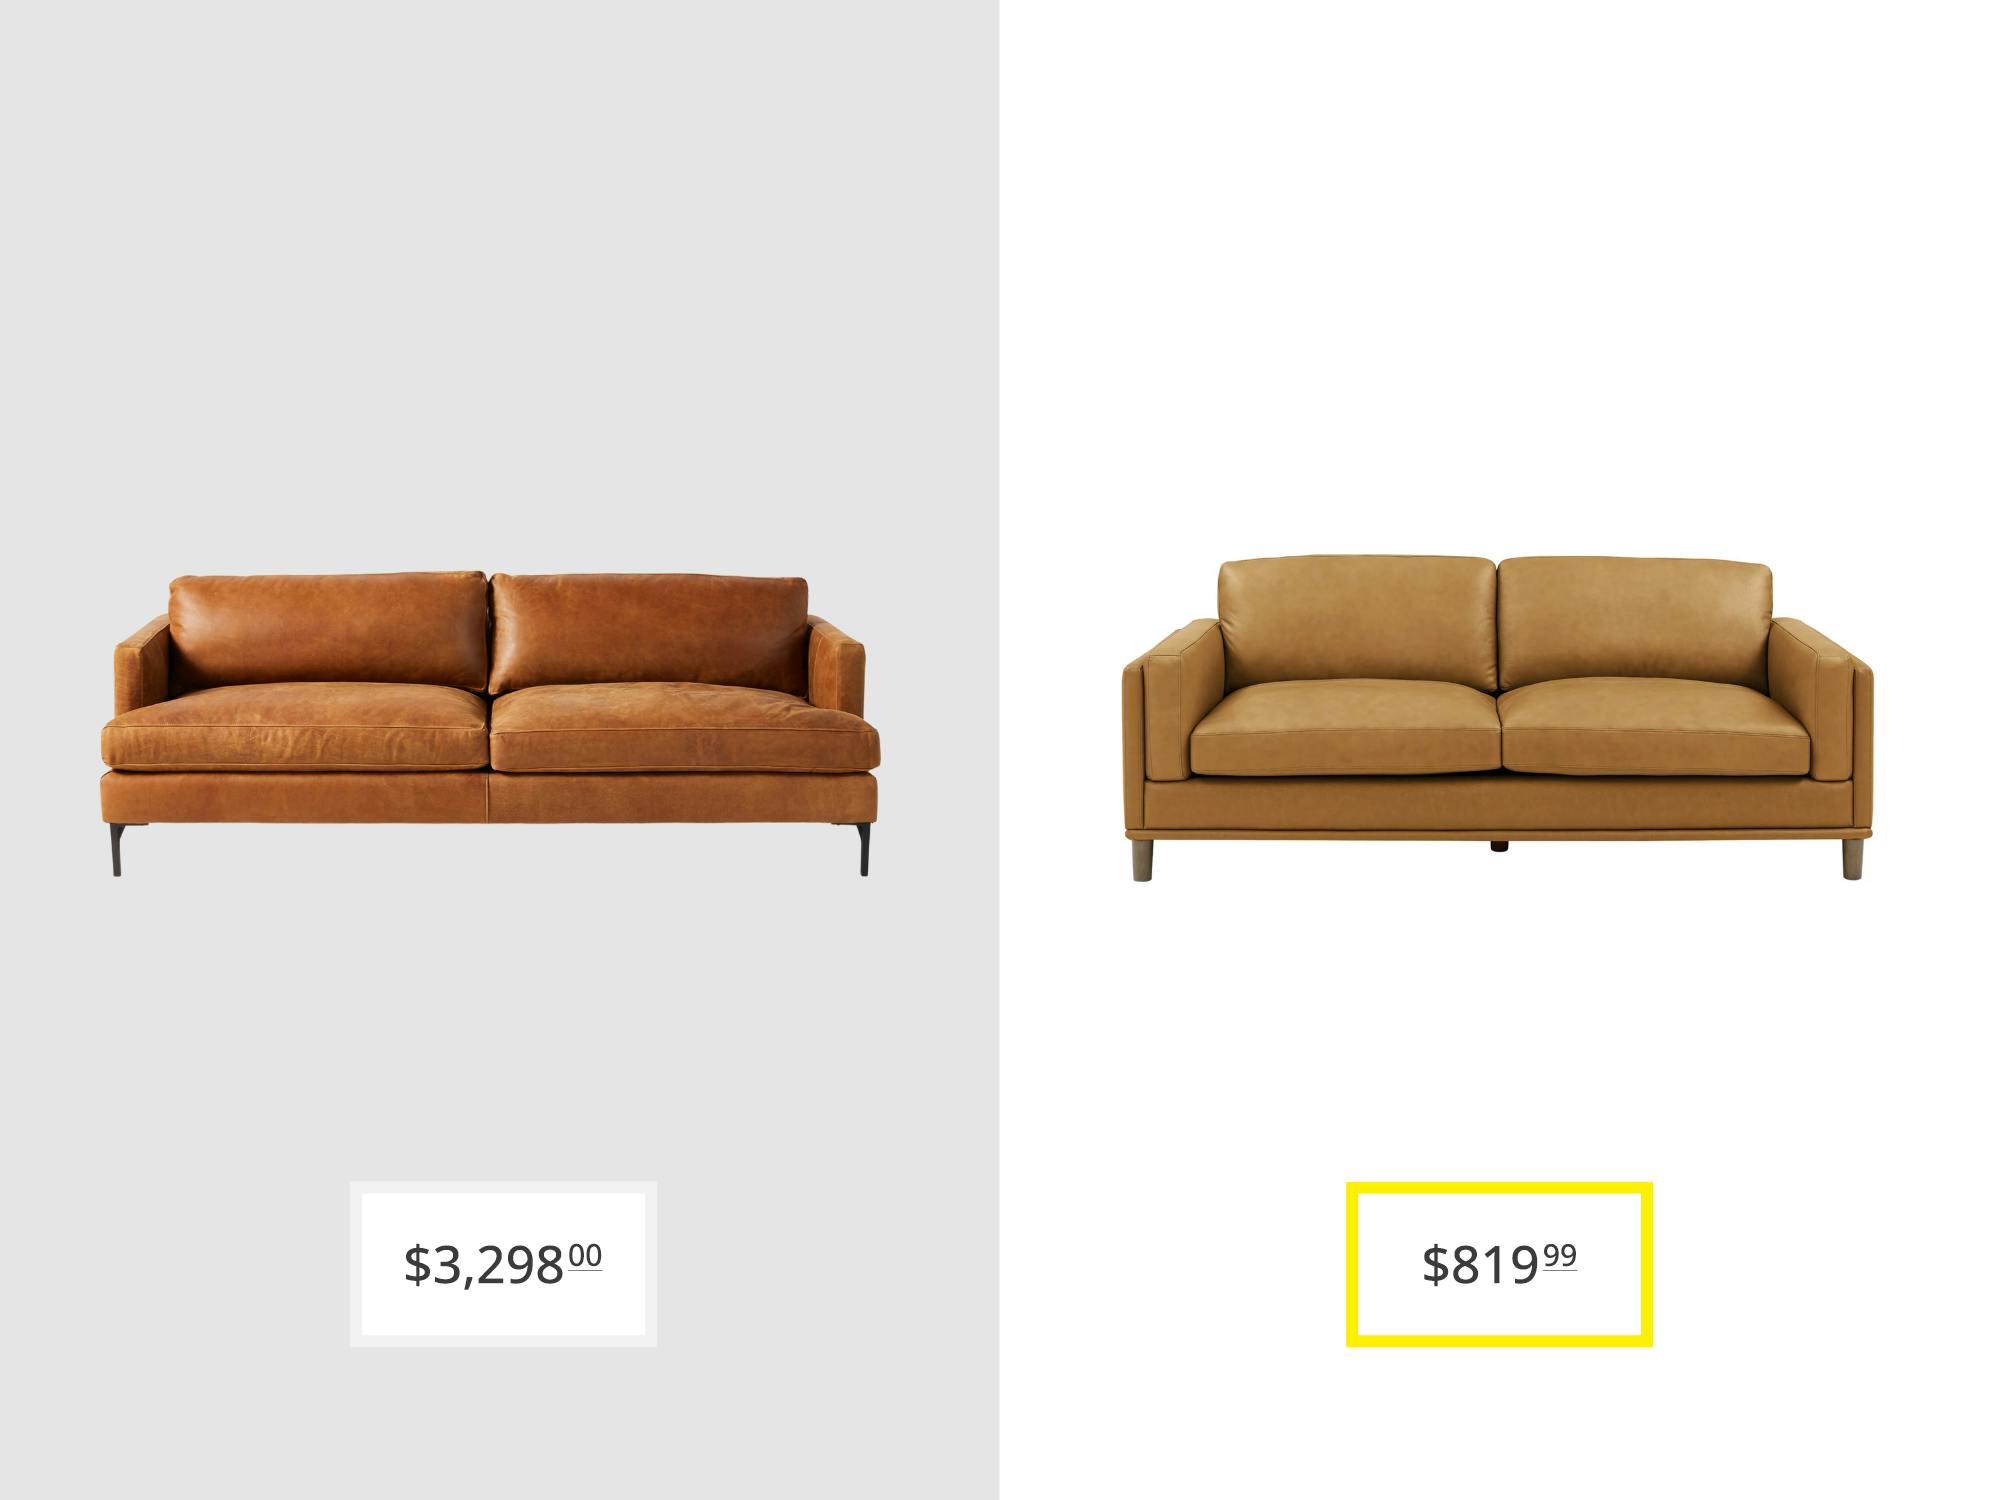 price comparison graphic with anthropologie bowen leather sofa and wade logan salix upholstered sofa